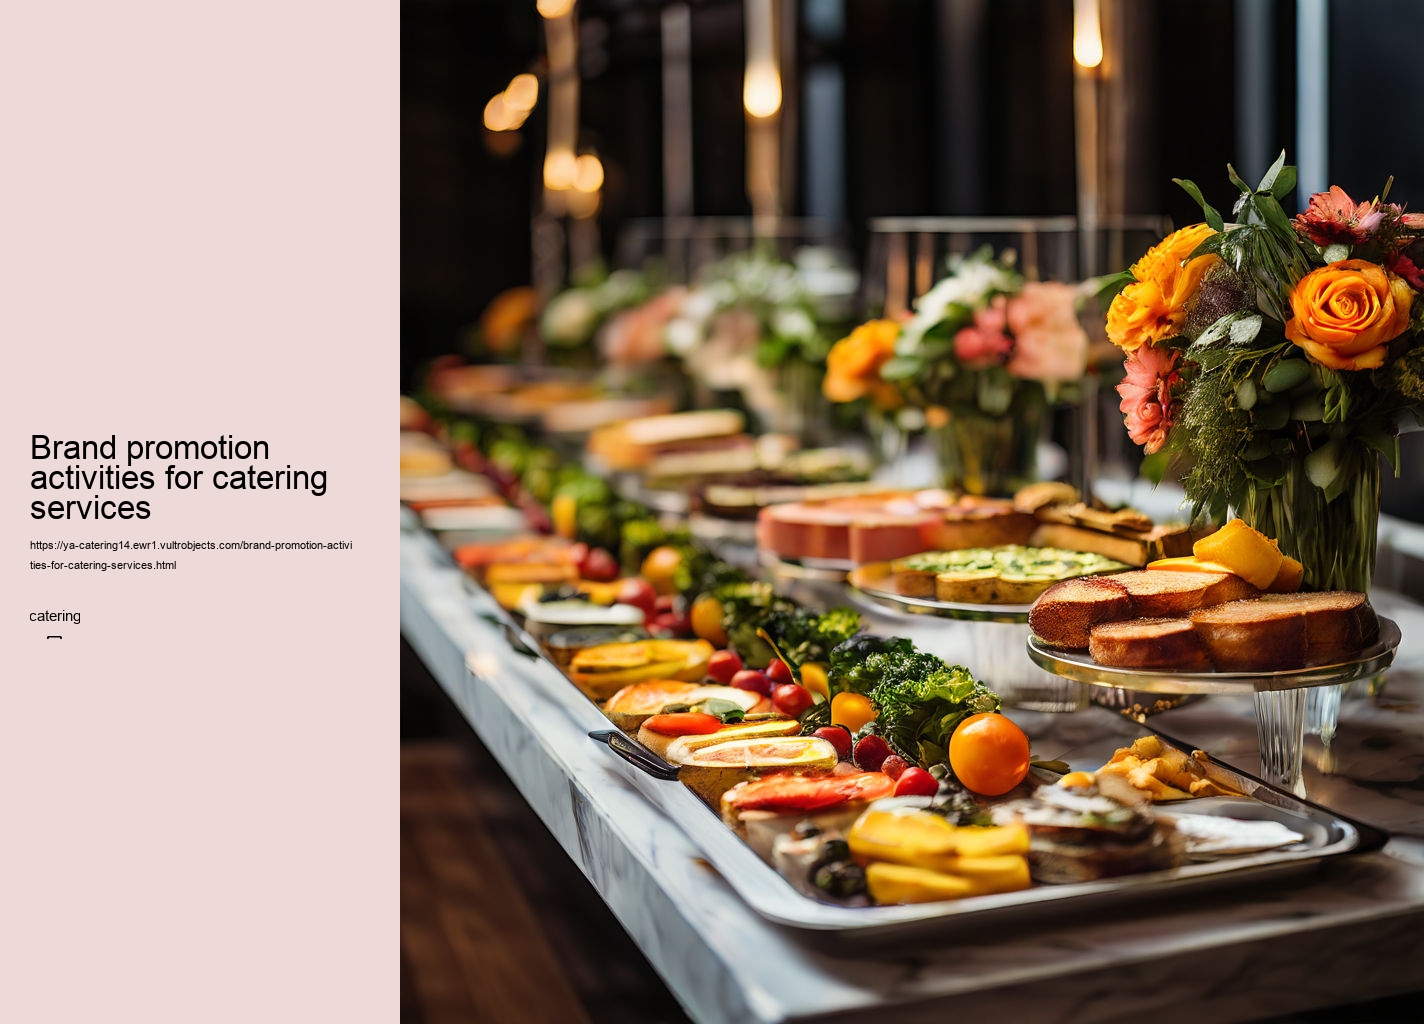 Brand promotion activities for catering services